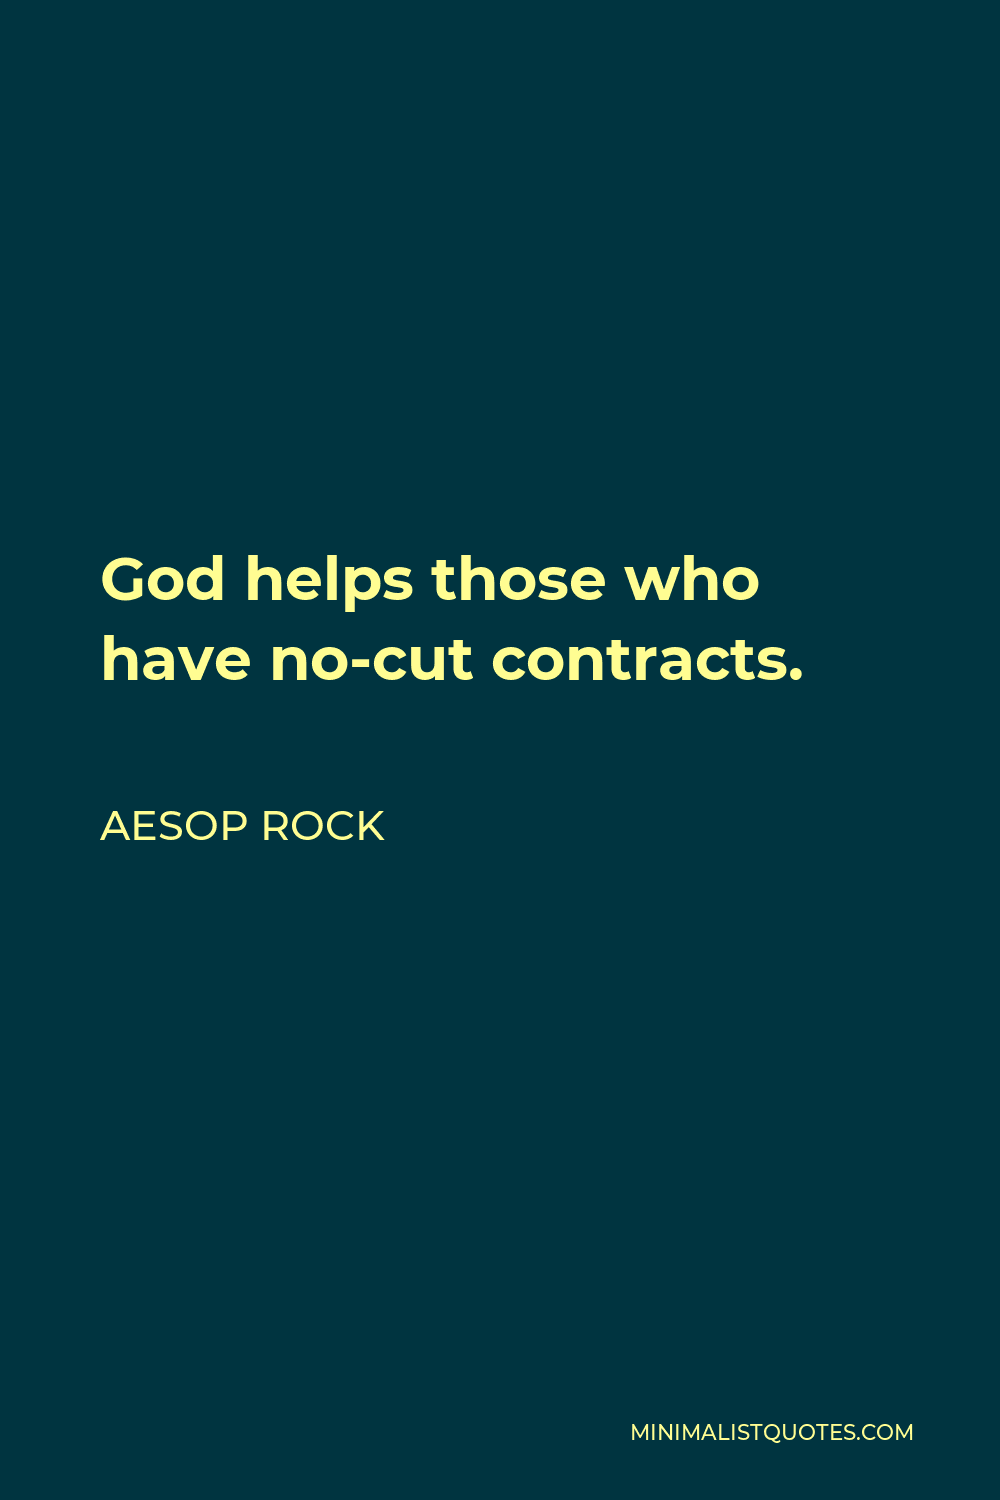 Aesop Rock Quote - God helps those who have no-cut contracts.